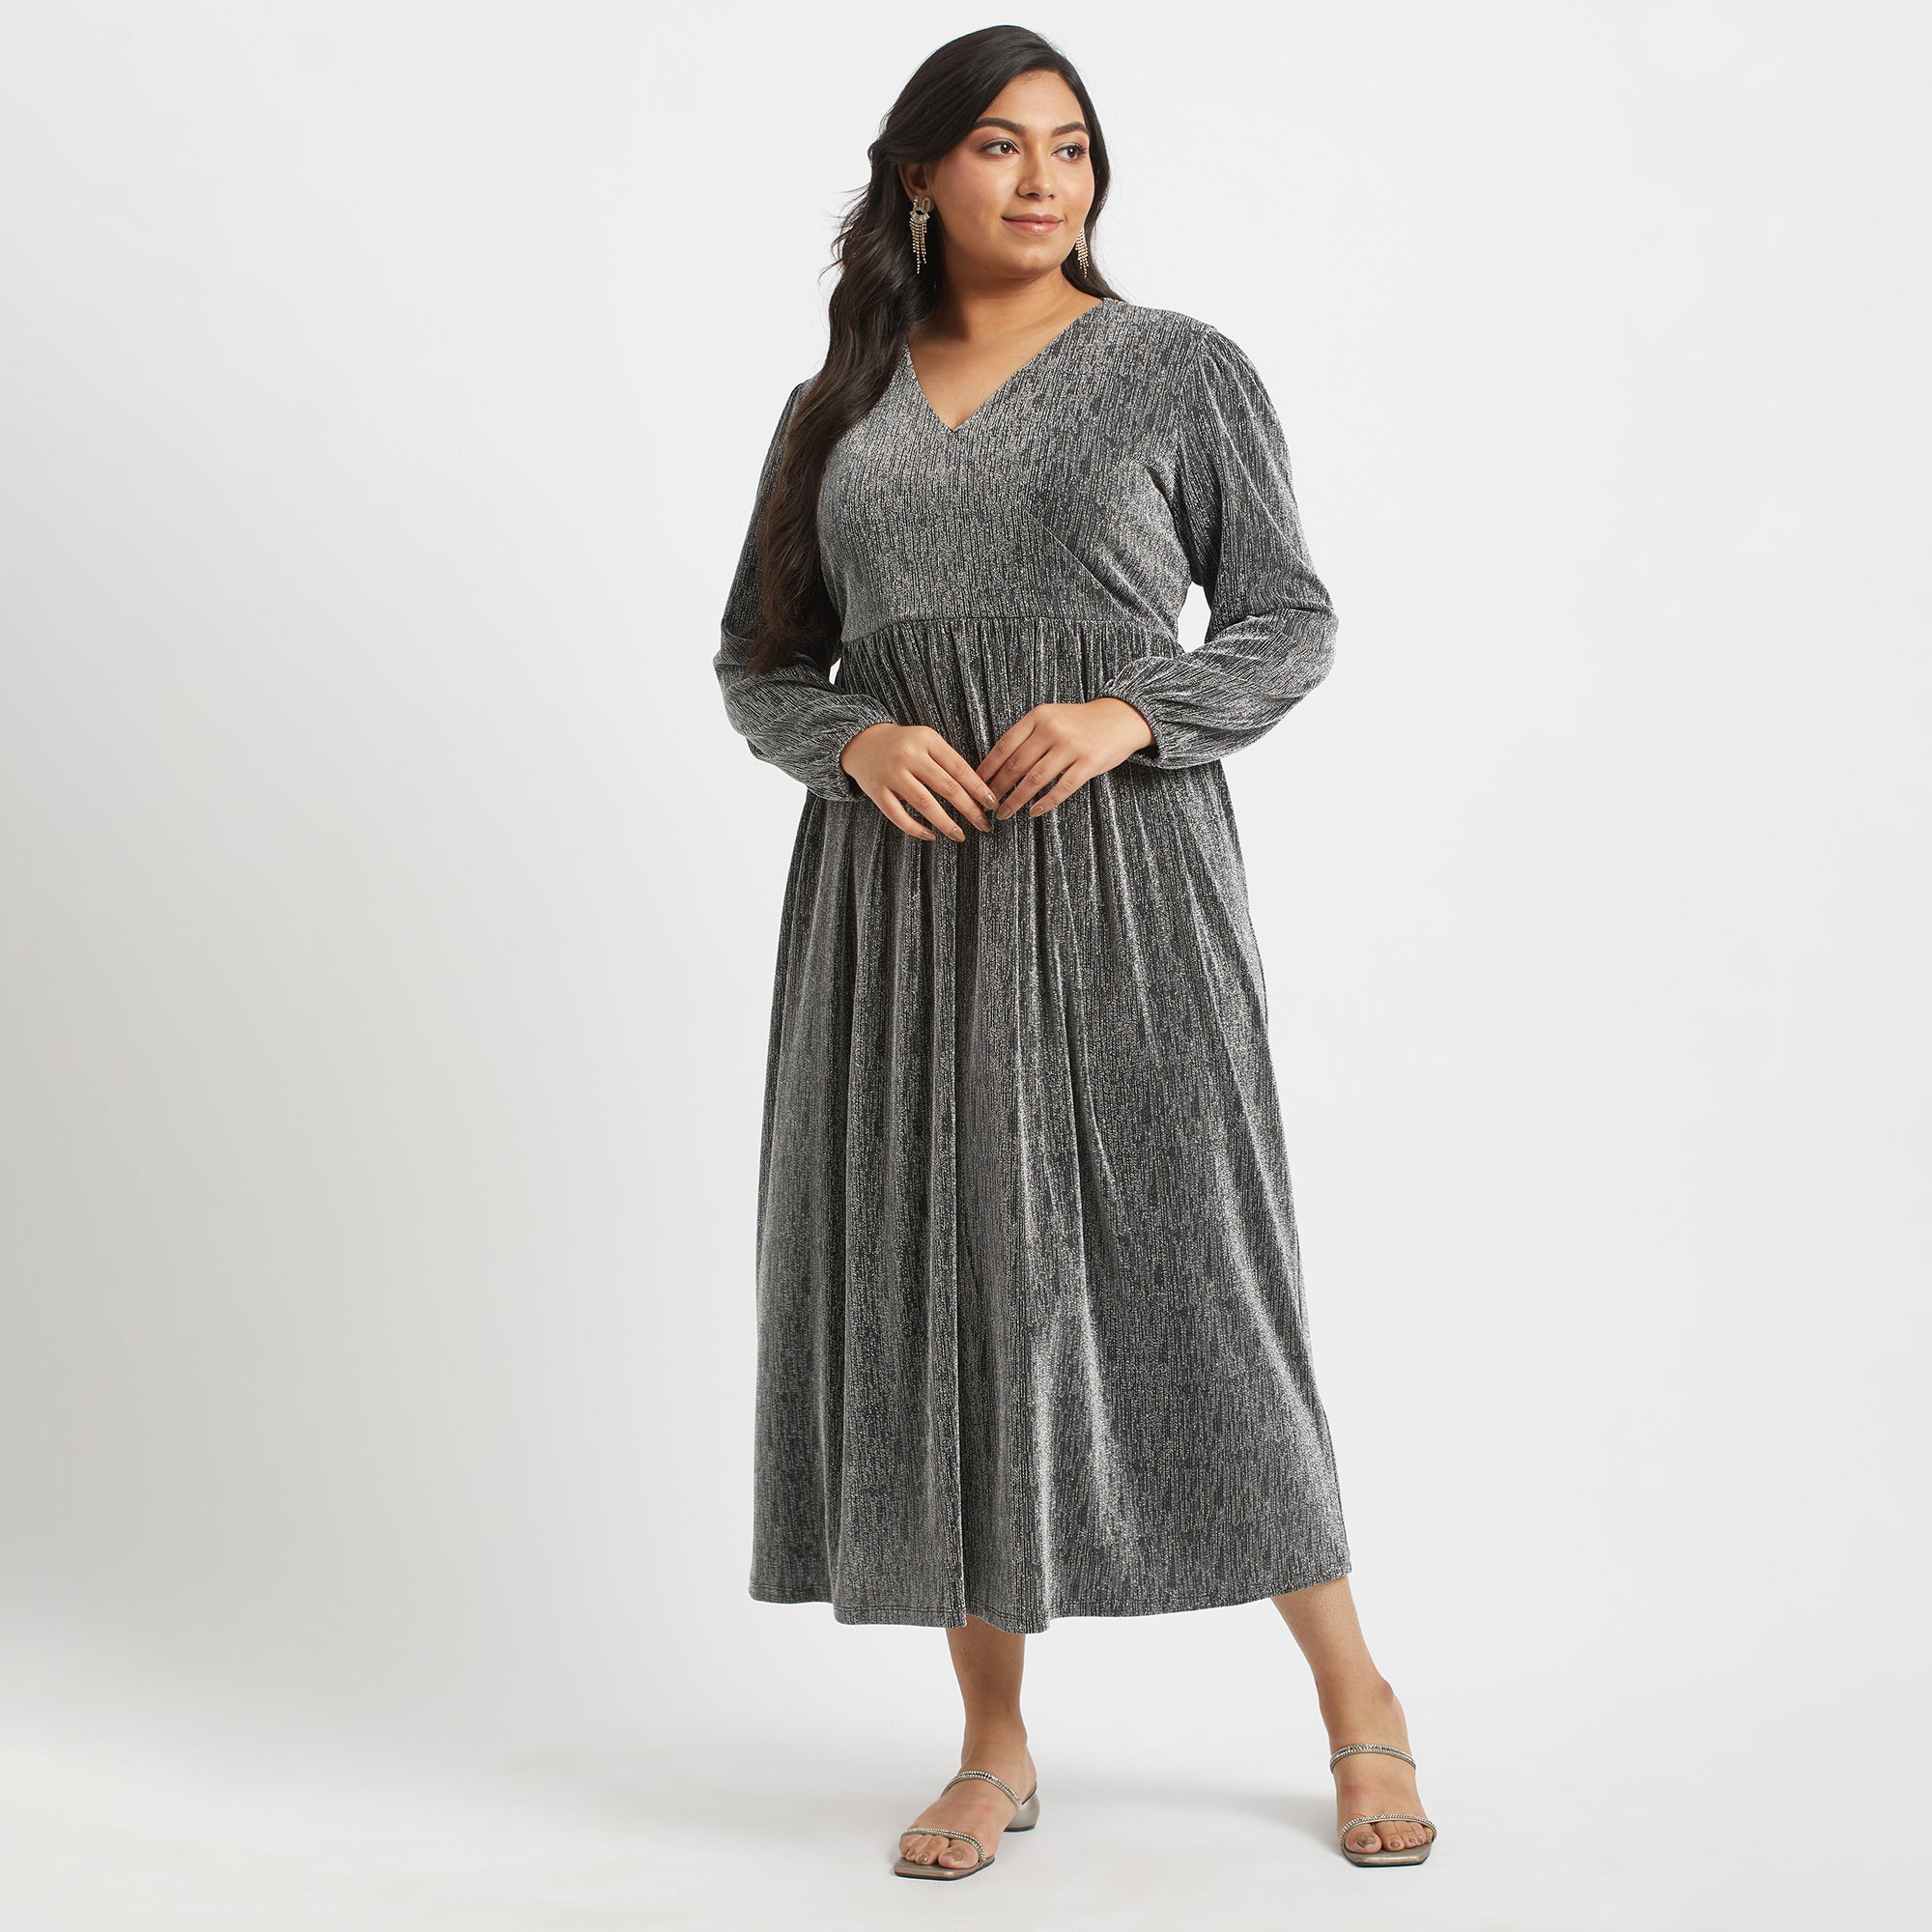 Stylish Plus Size Dresses - Party, Casual & More